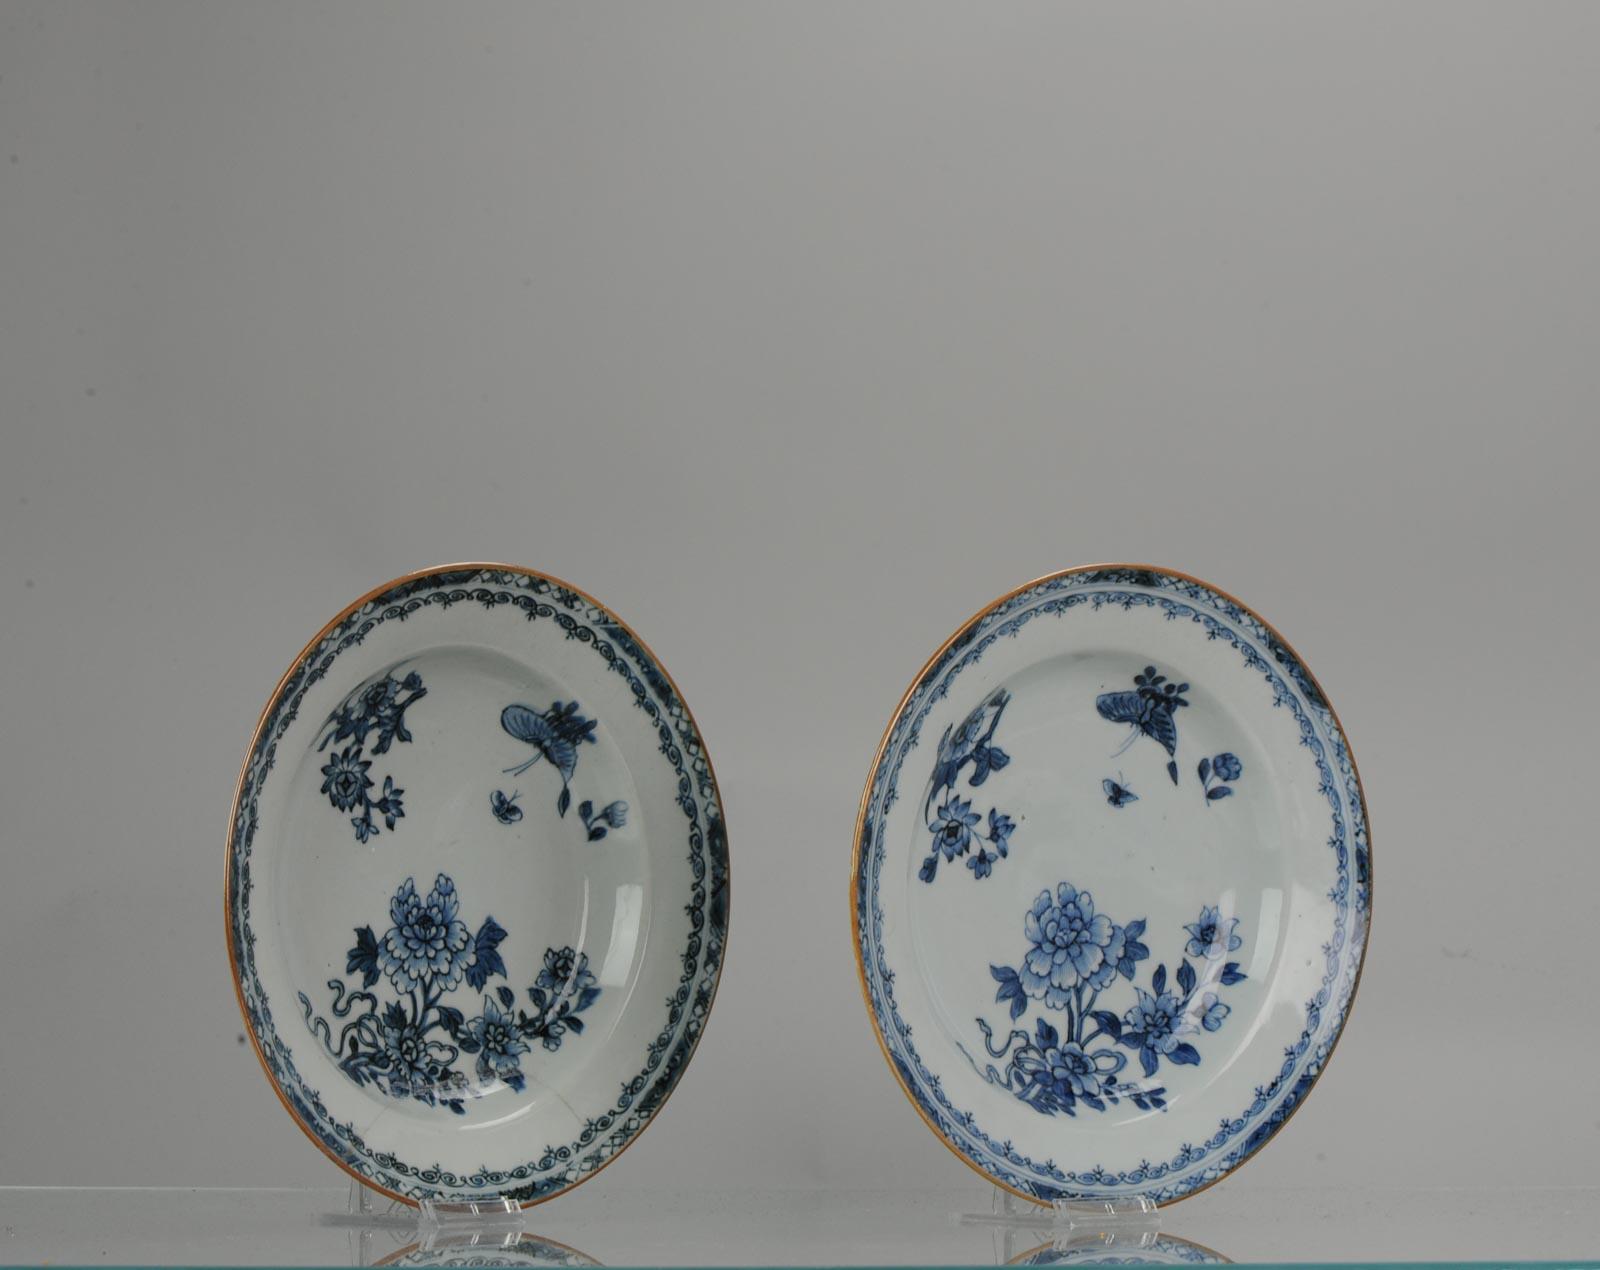 A very nicely decorated pair of plates with nice symbolism.

Additional information:
Material: Porcelain & Pottery
Type: Plates
Region of Origin: China
Period: 18th century Qing (1661 - 1912)
Age: Pre-1800
Condition: Dish 1 restored piece and some